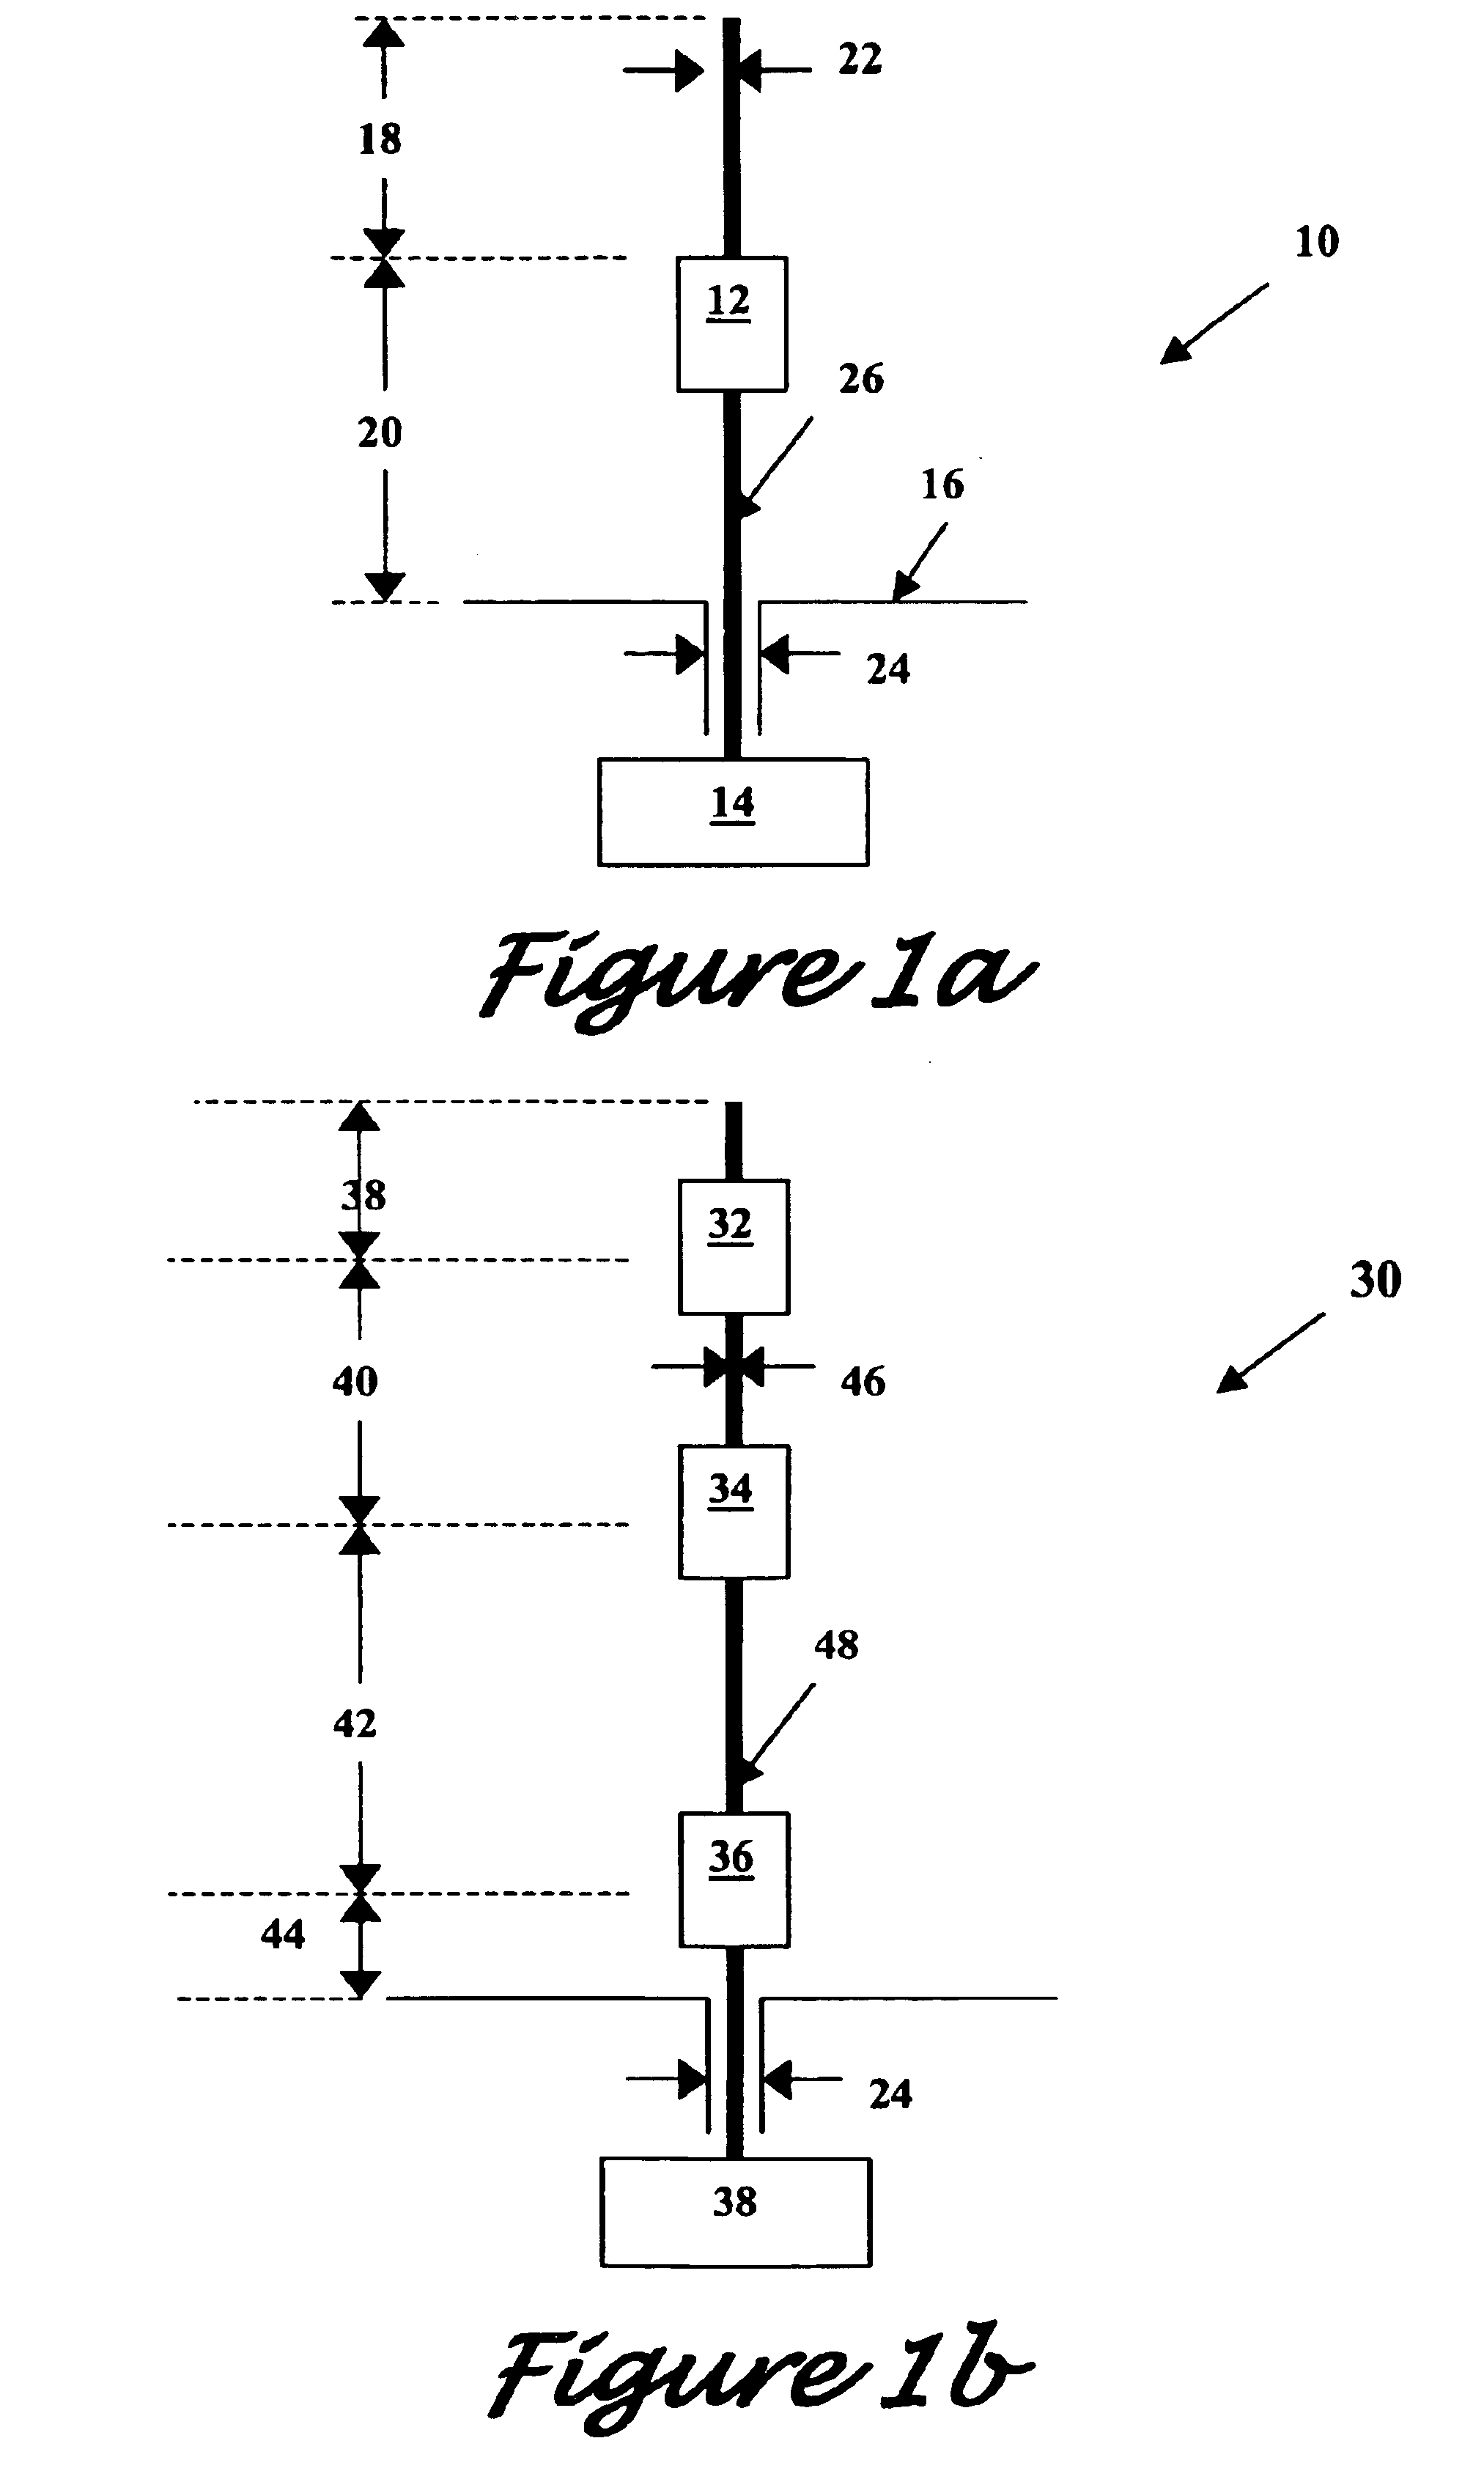 Broadband monopole/ dipole antenna with parallel inductor-resistor load circuits and matching networks